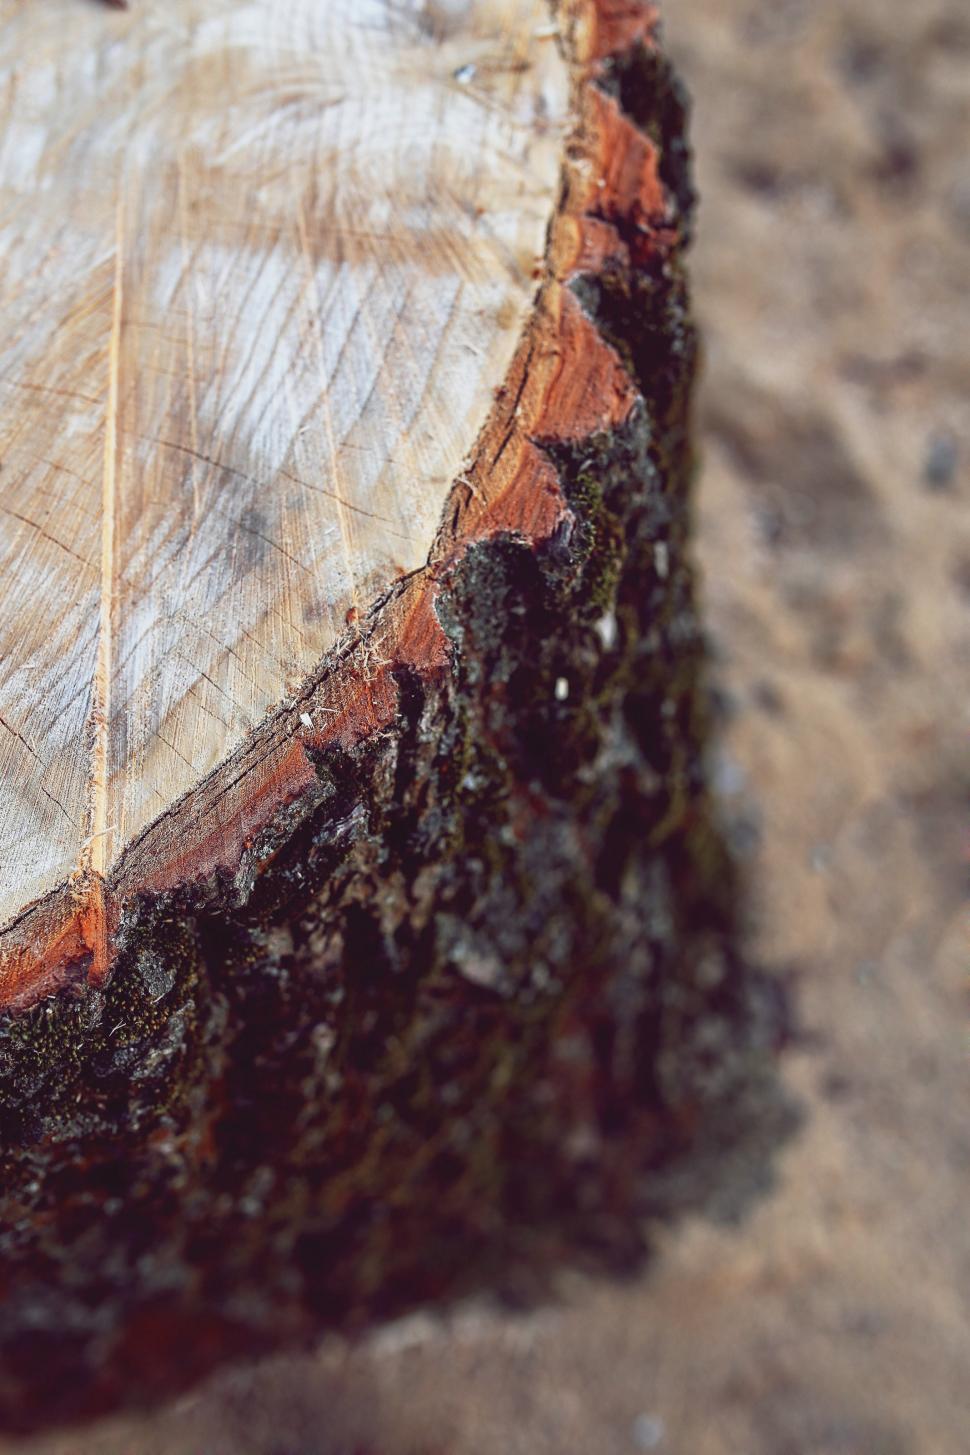 Free Image of Cross-section of a Wooden Plank 